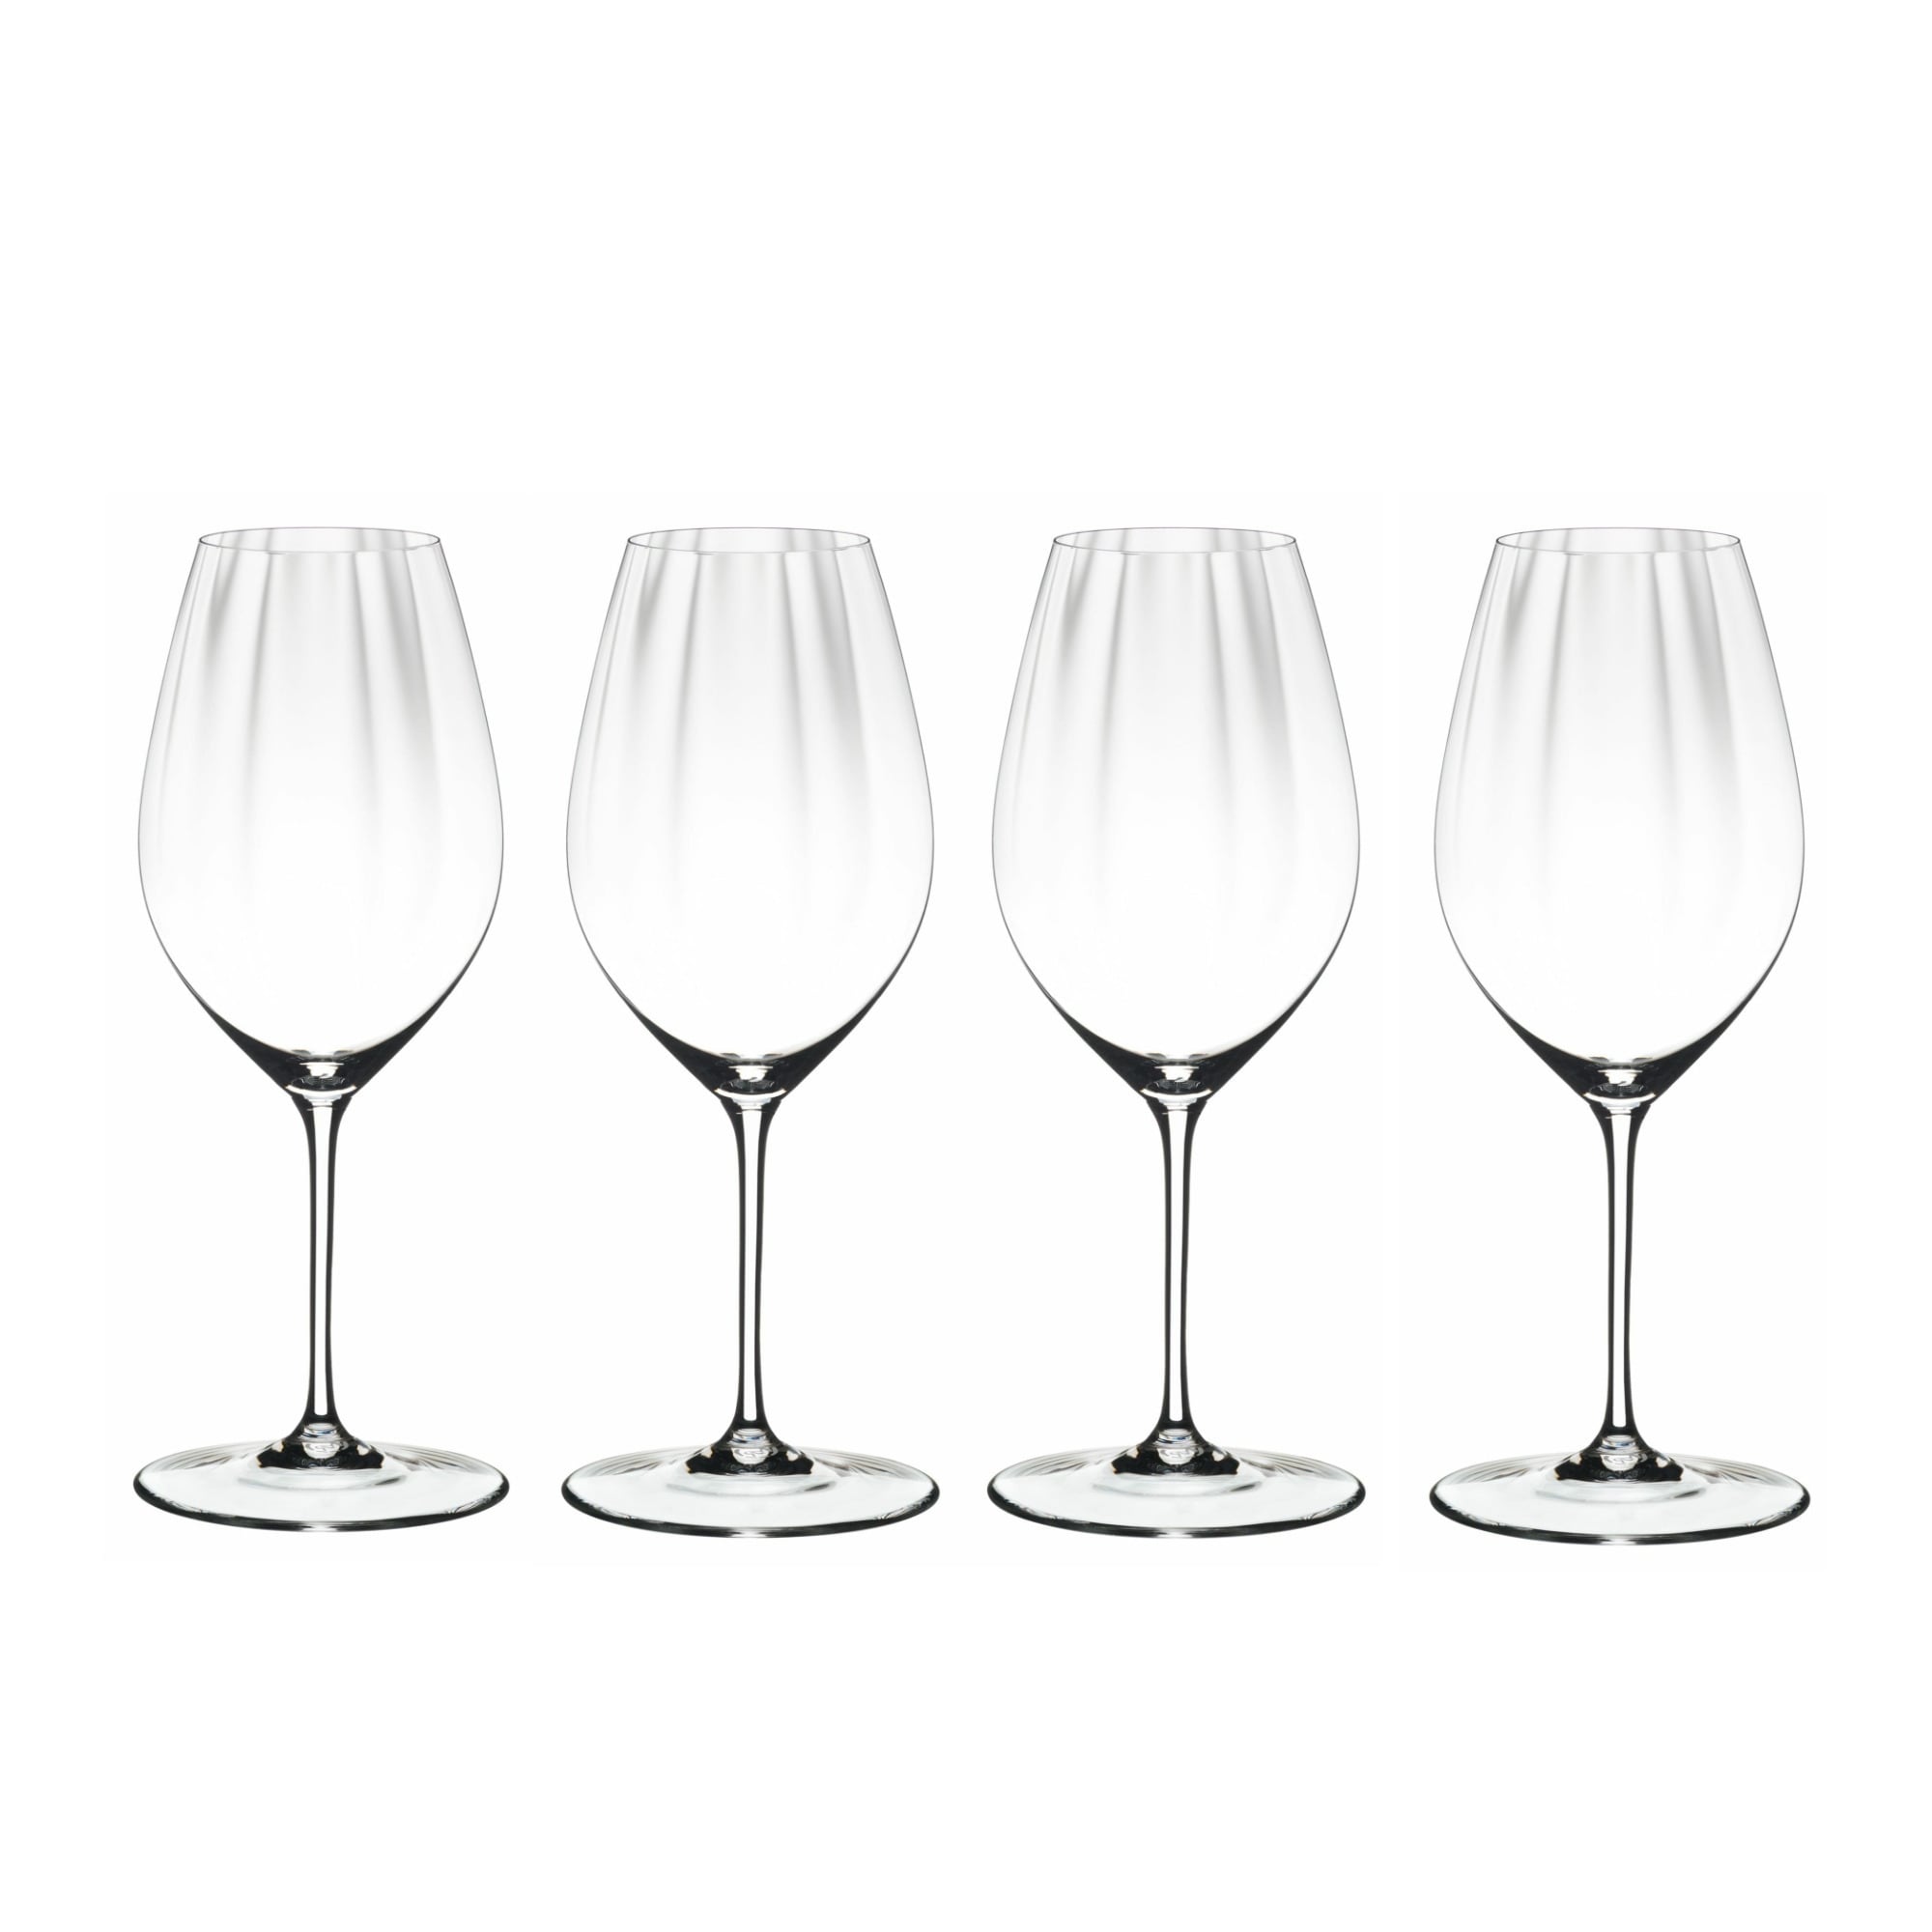 https://ak1.ostkcdn.com/images/products/is/images/direct/a7d4c69354a324c5e875c6ff644afaa446c64d46/Riedel-Performance-Red-White-Crystal-Wine-Glasses-%28Set-of-4%29.jpg